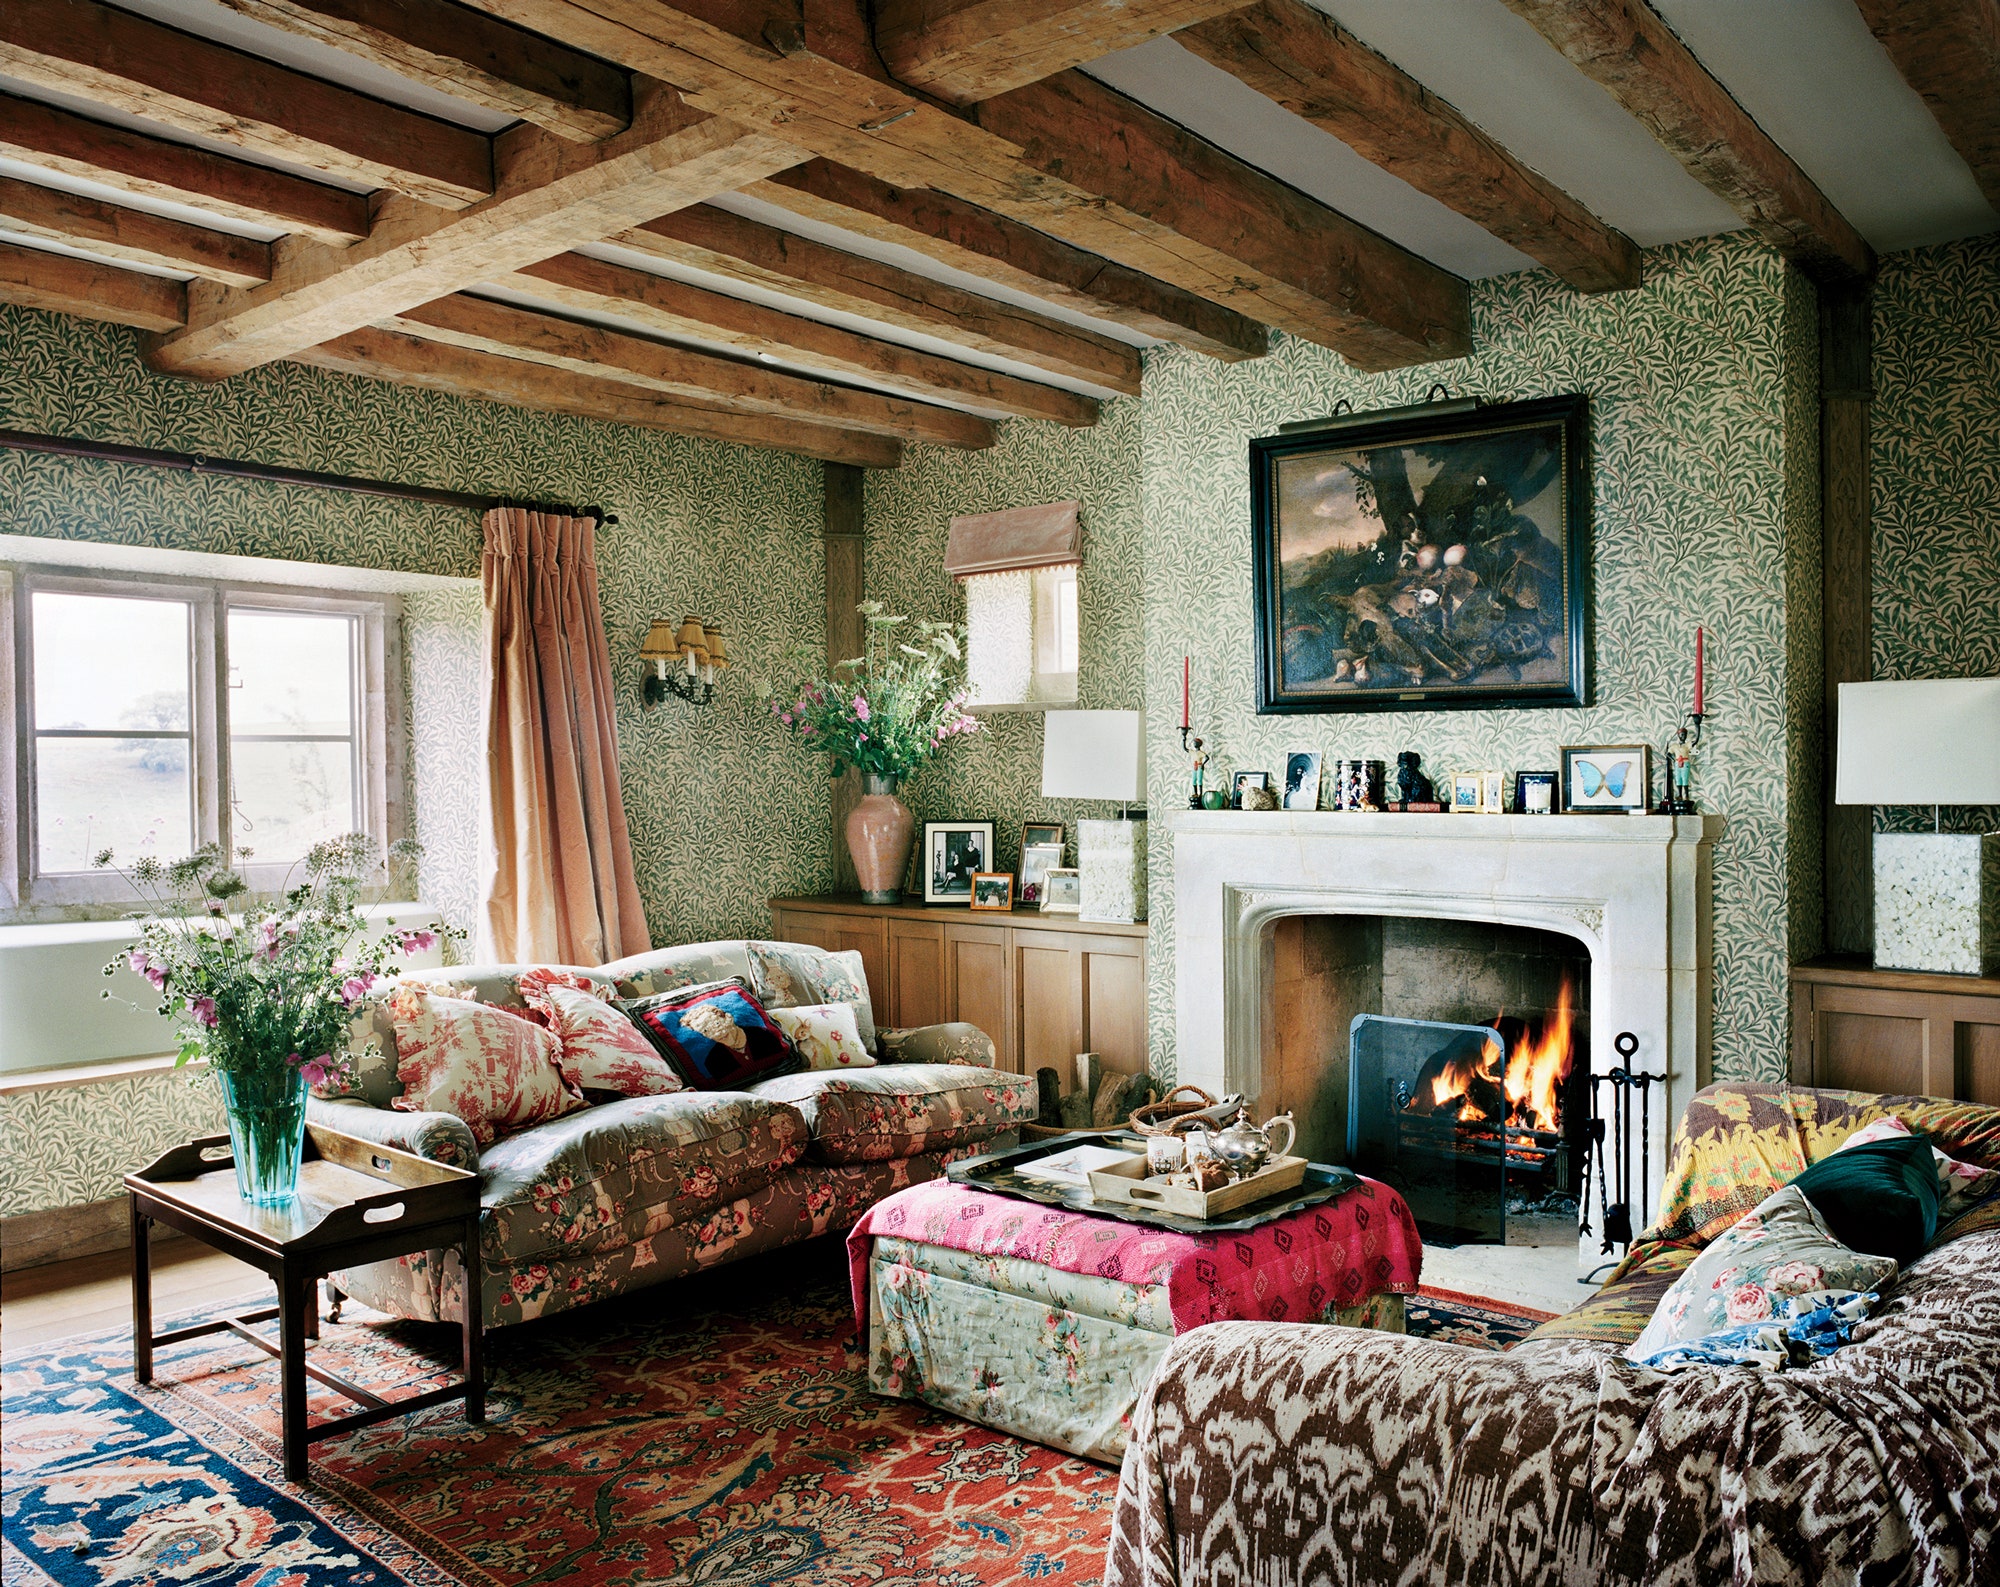 How To Achieve The Rustic Vogue Interior Design Style